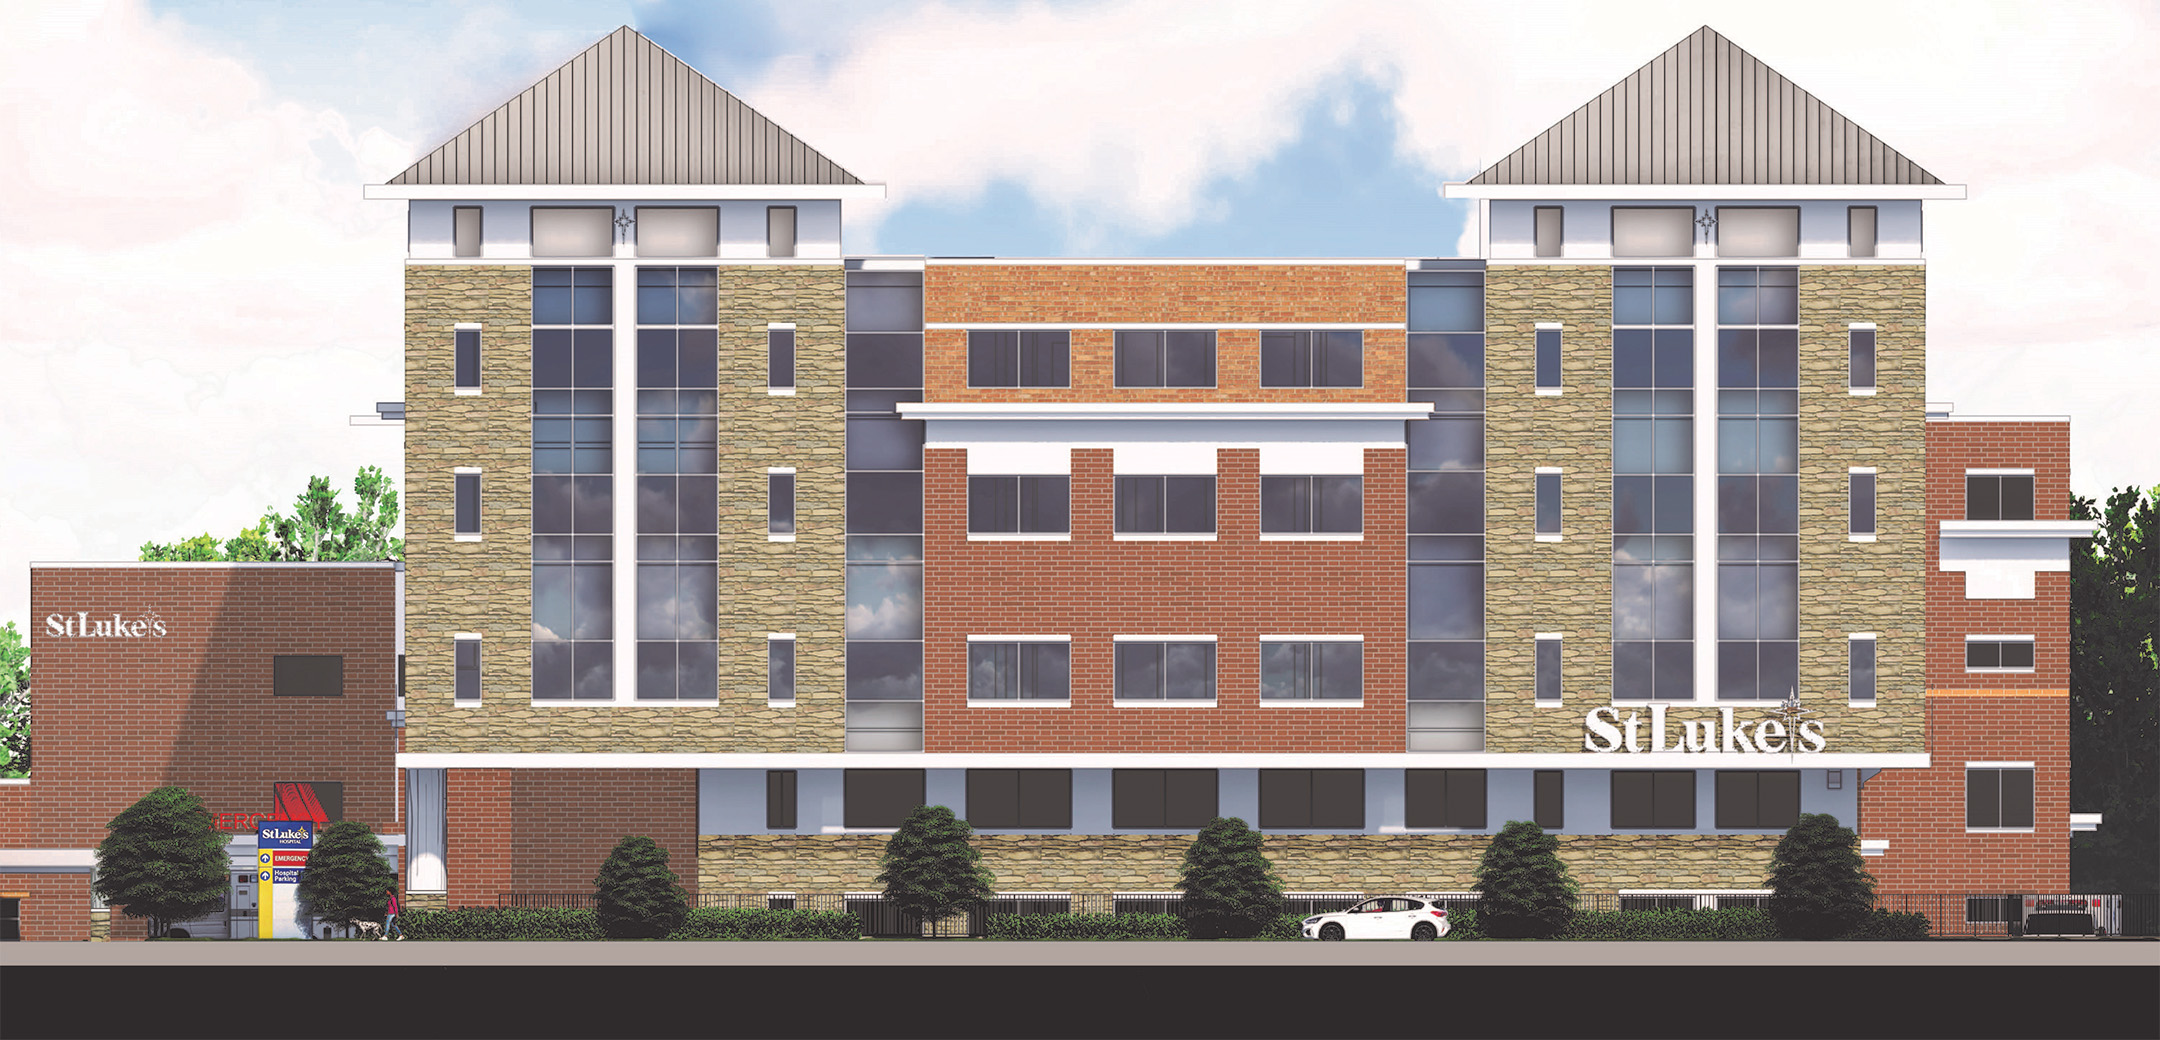 The side view of a rendering of St. Luke's University Health Network's Mother's and Baby Tower Pavilion showcasing the red and tan brick exterior